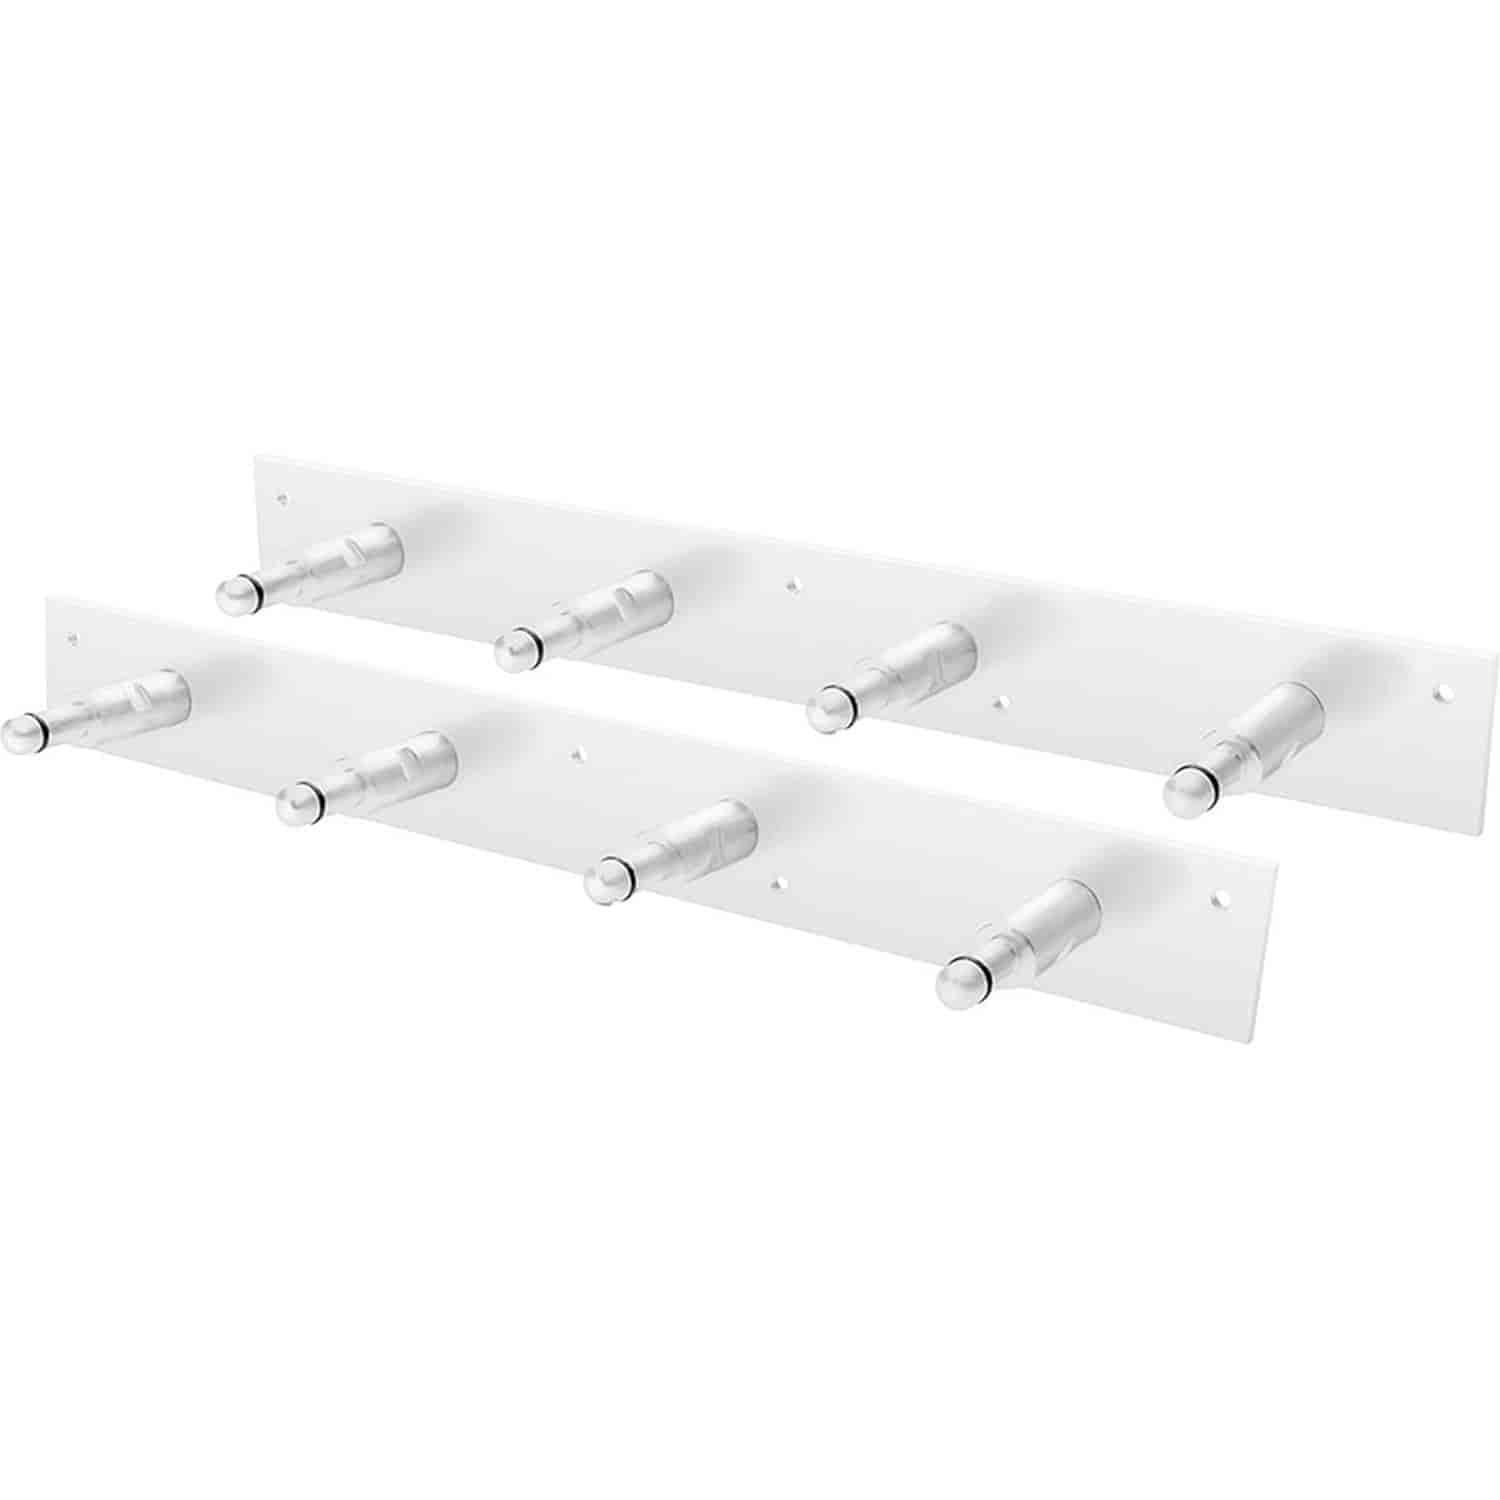 Shock Rack Holds up to 4 Shock Units